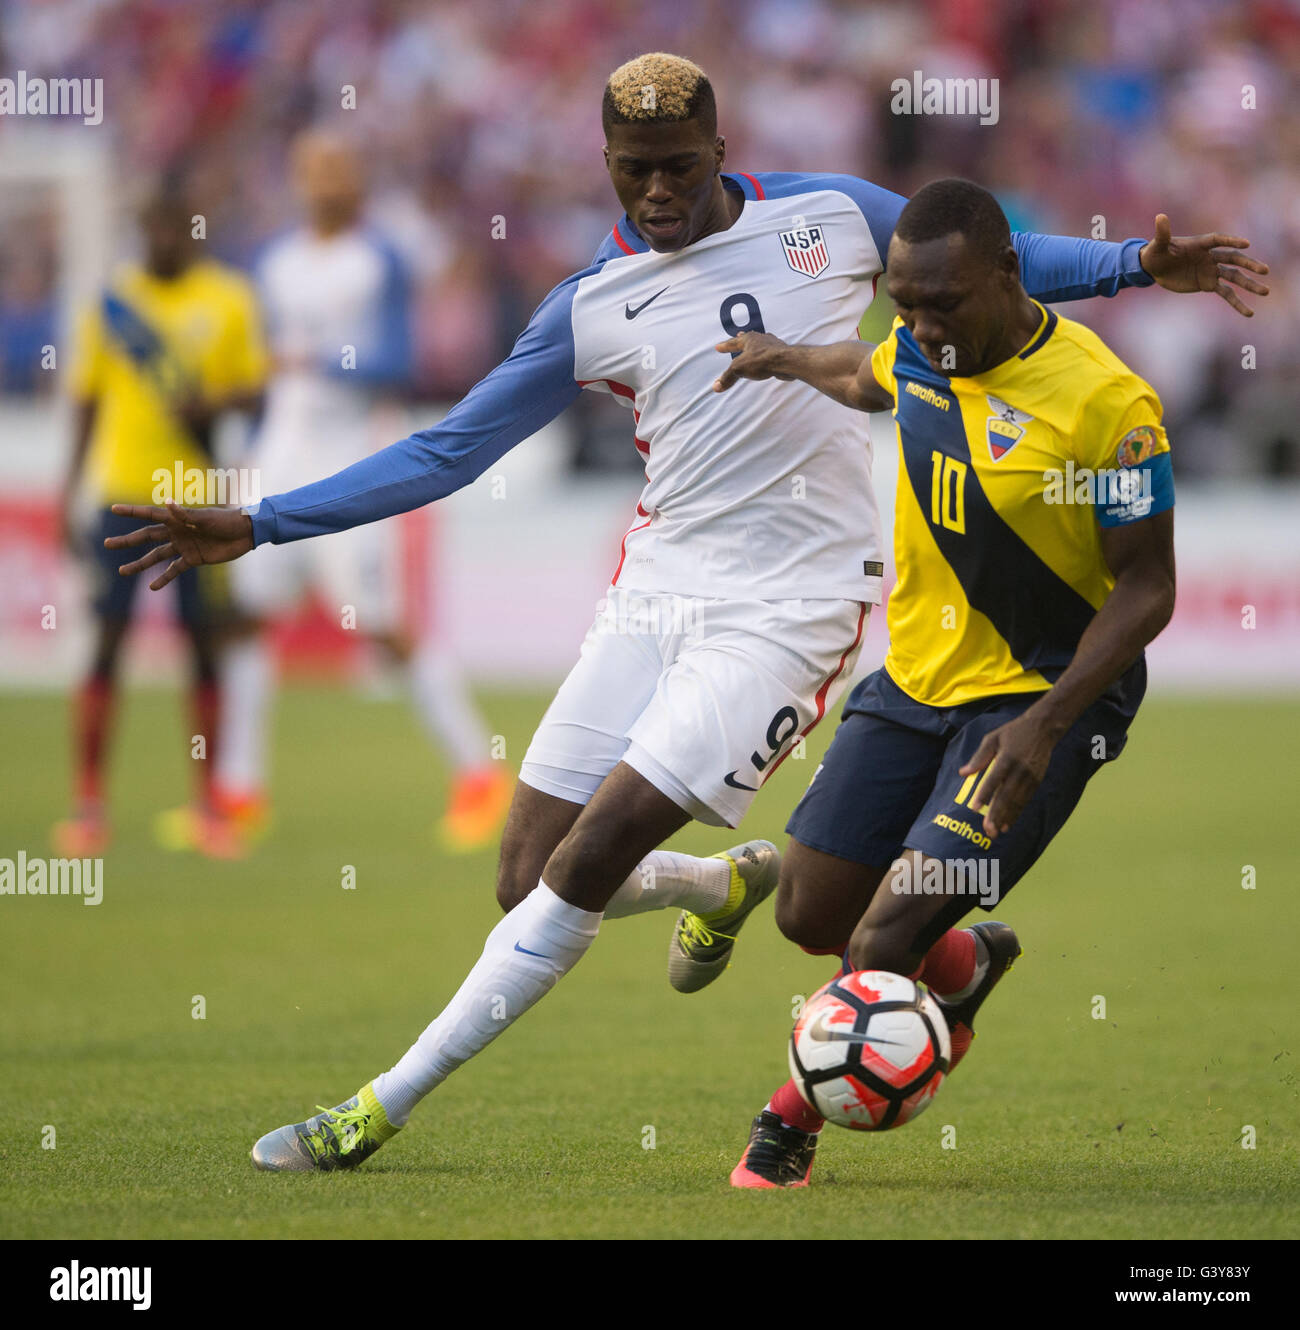 Seattle. 16th June, 2016. Gyasi Zardes (L) of the United States vies with Walter Ayovi of Ecuador during their quarterfinal match of 2016 Copa America soccer tournament at Century Link Field in Seattle, the United States on June 16, 2016. The United States won 2-1. Credit:  Yang Lei/Xinhua/Alamy Live News Stock Photo